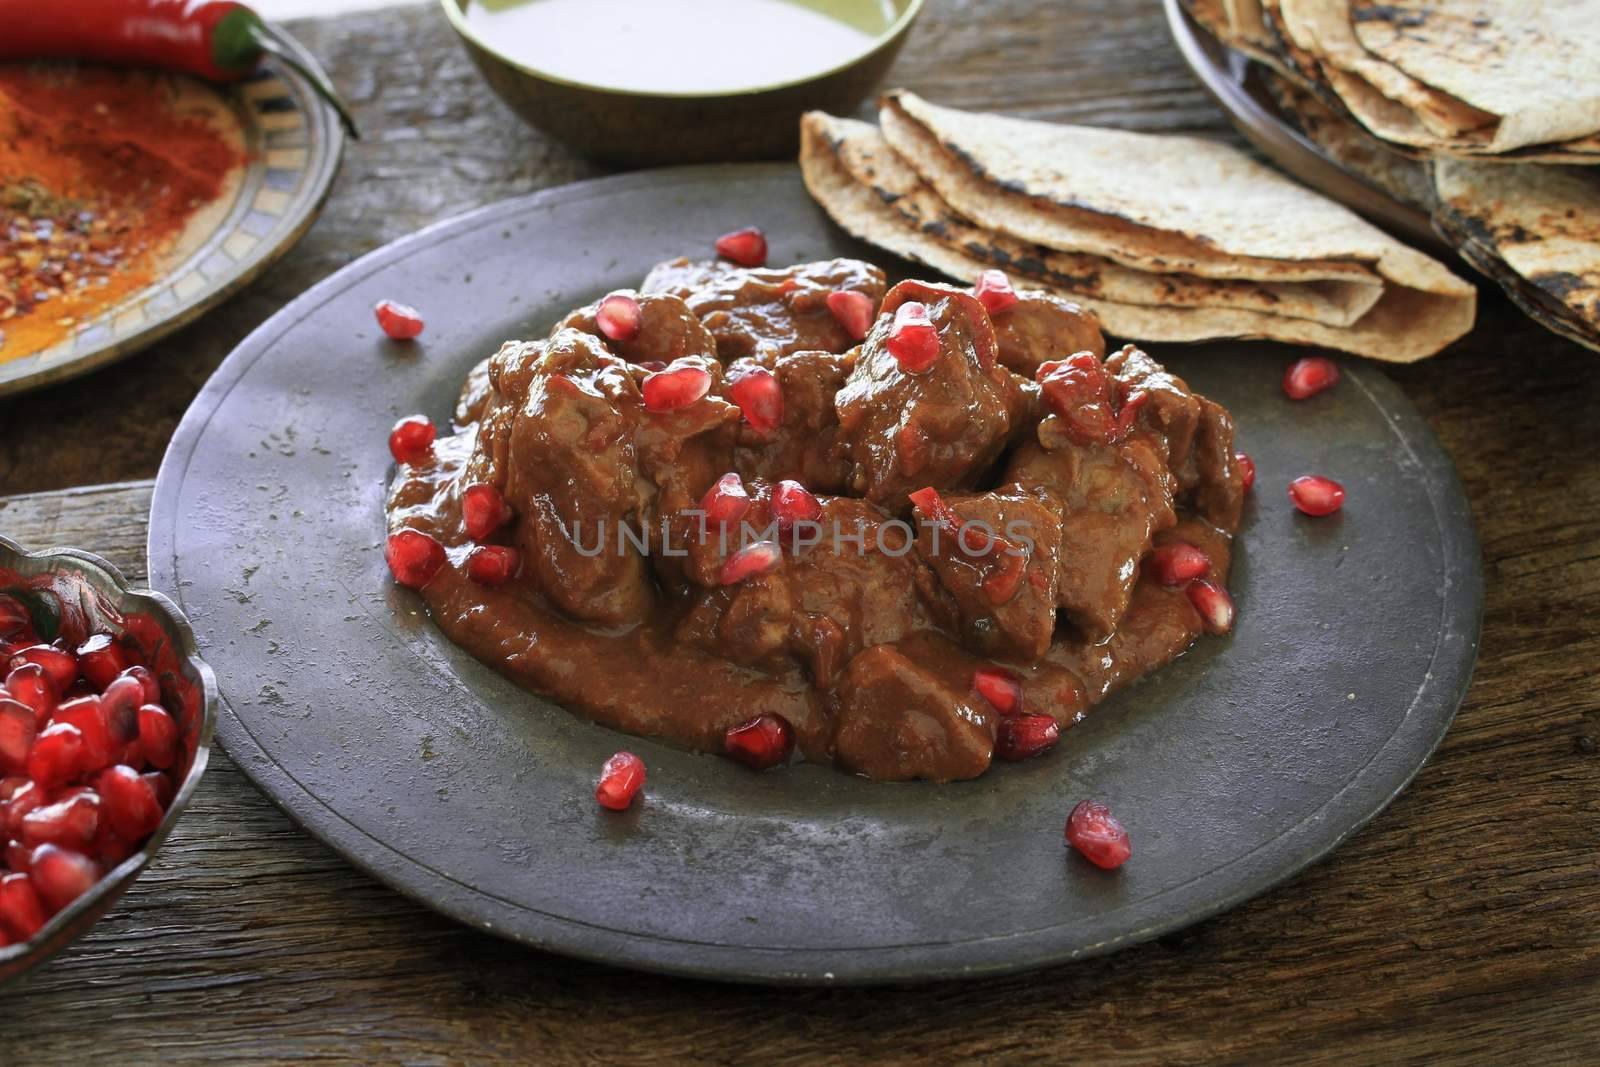 Indian beef lamb curry